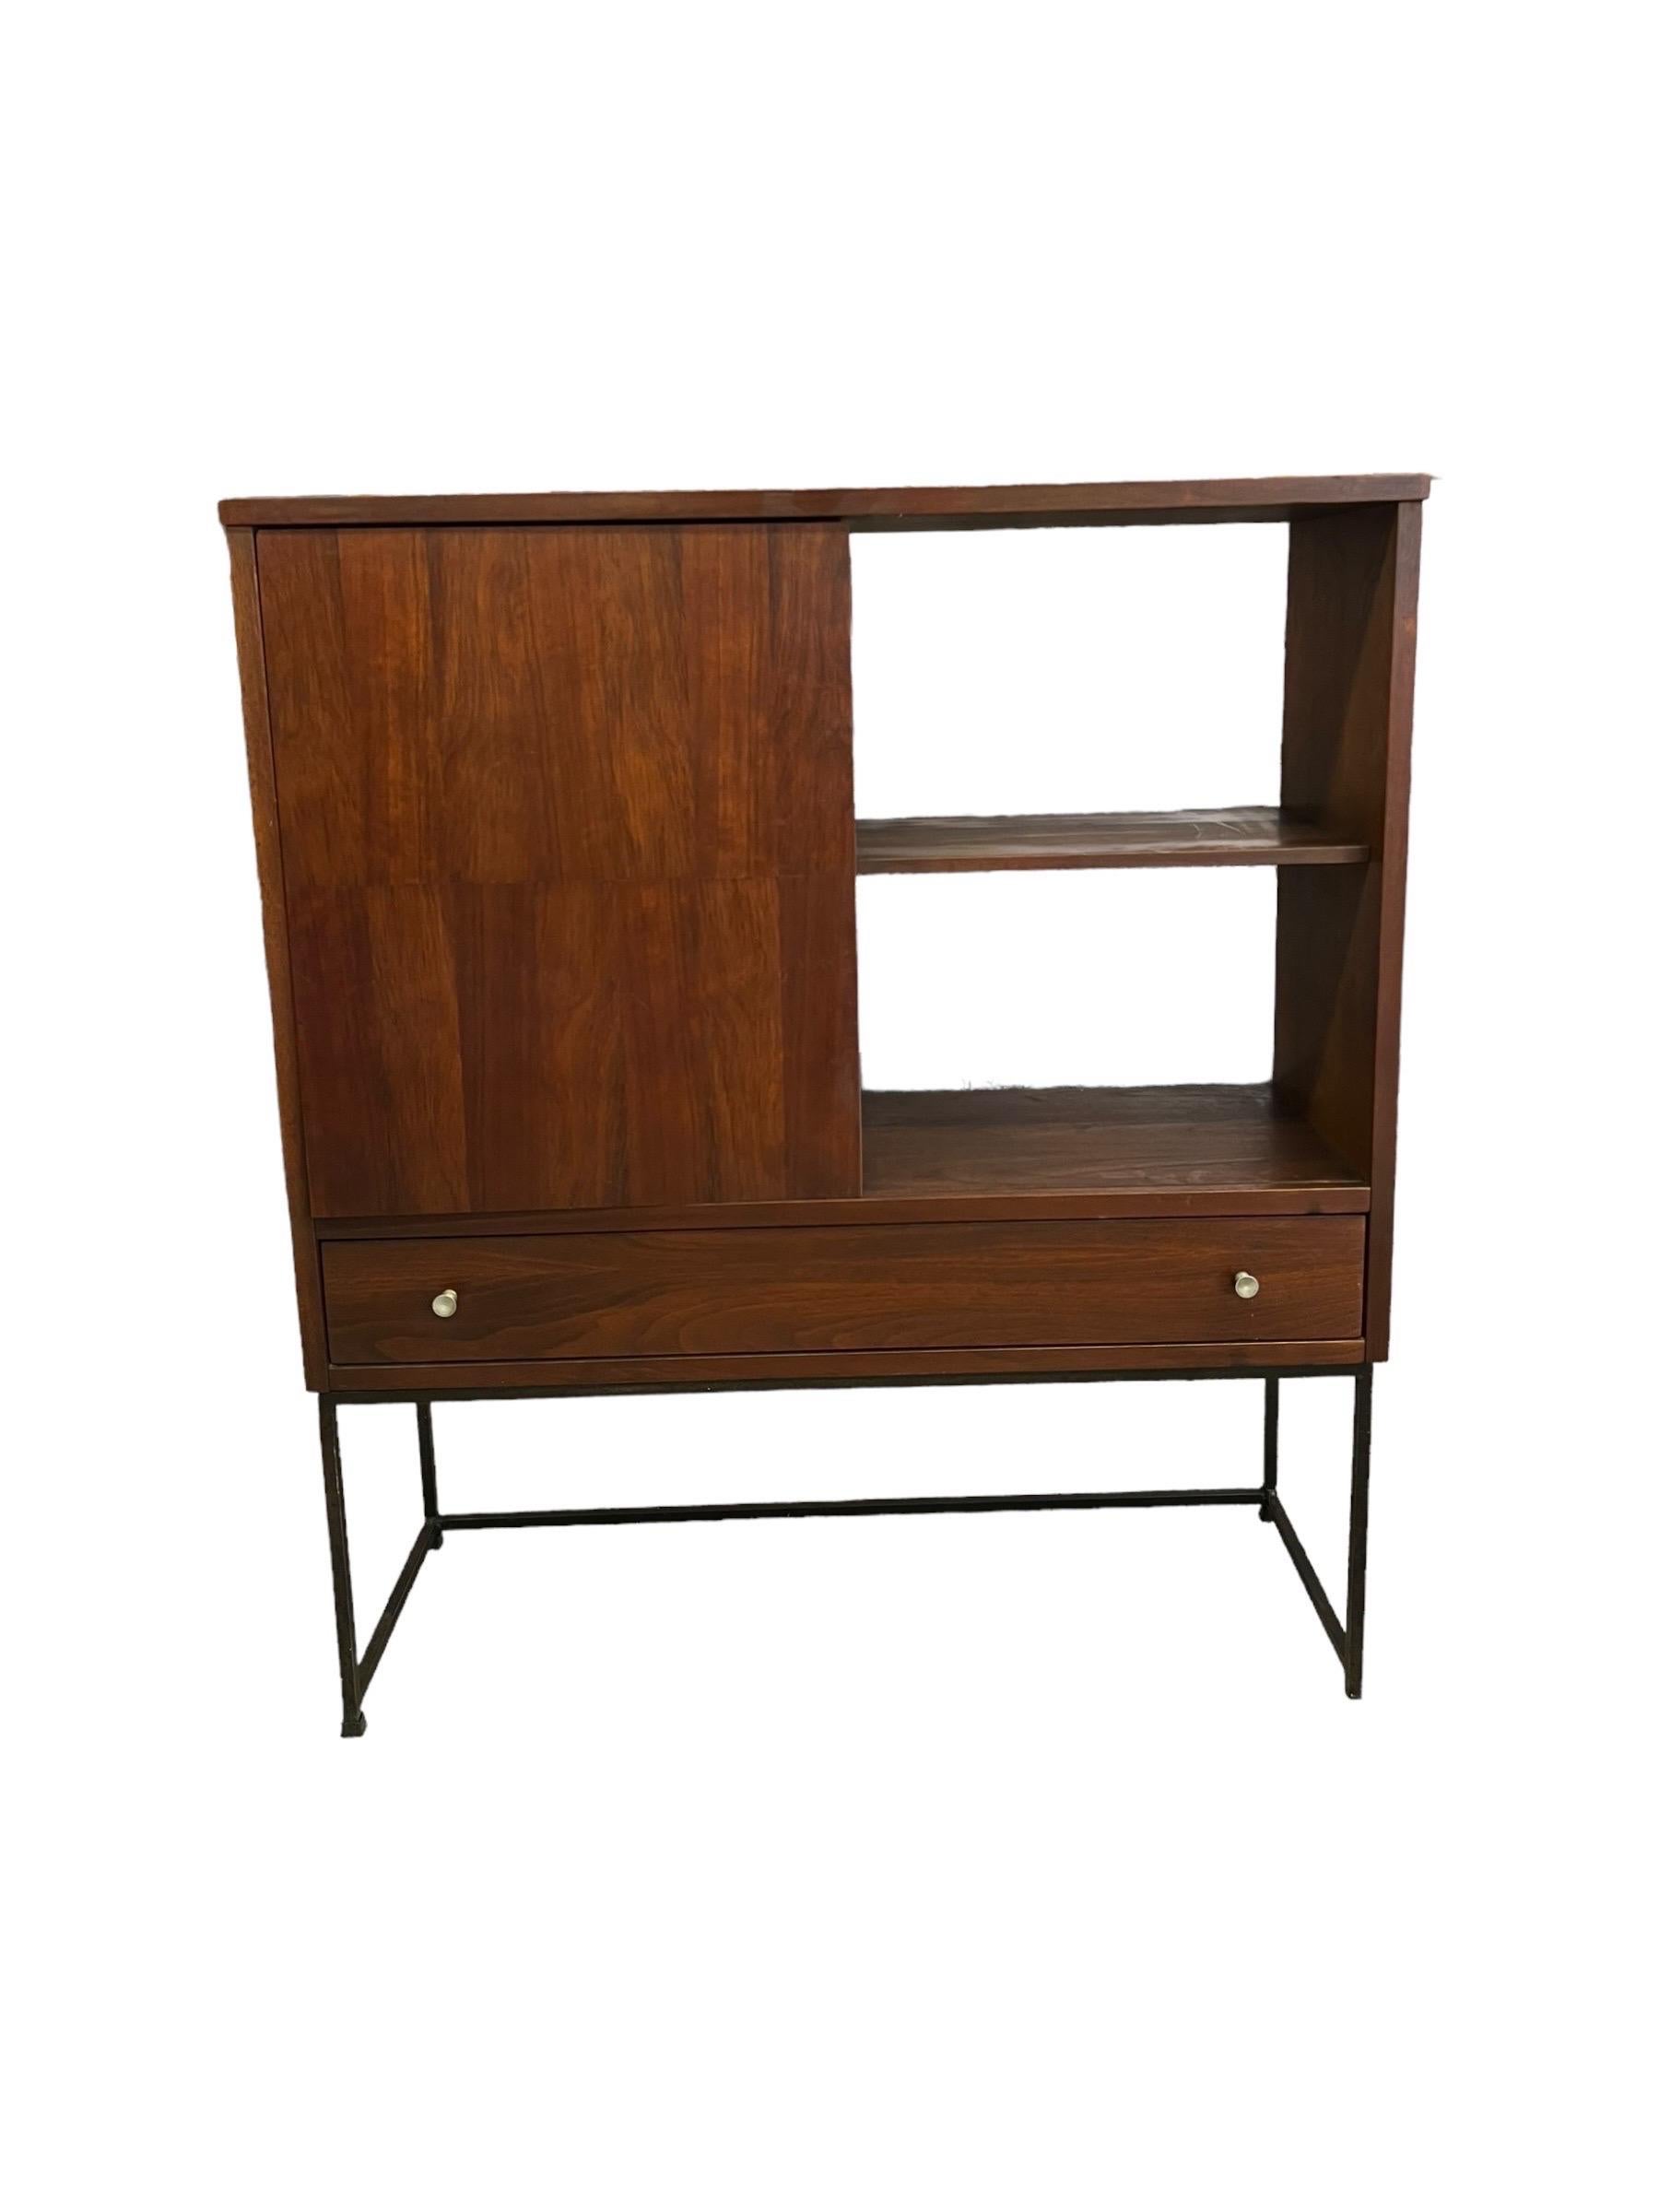 Late 20th Century Vintage Mid Century Modern Bookshelf With Sliding Door and Dovetailed Drawers